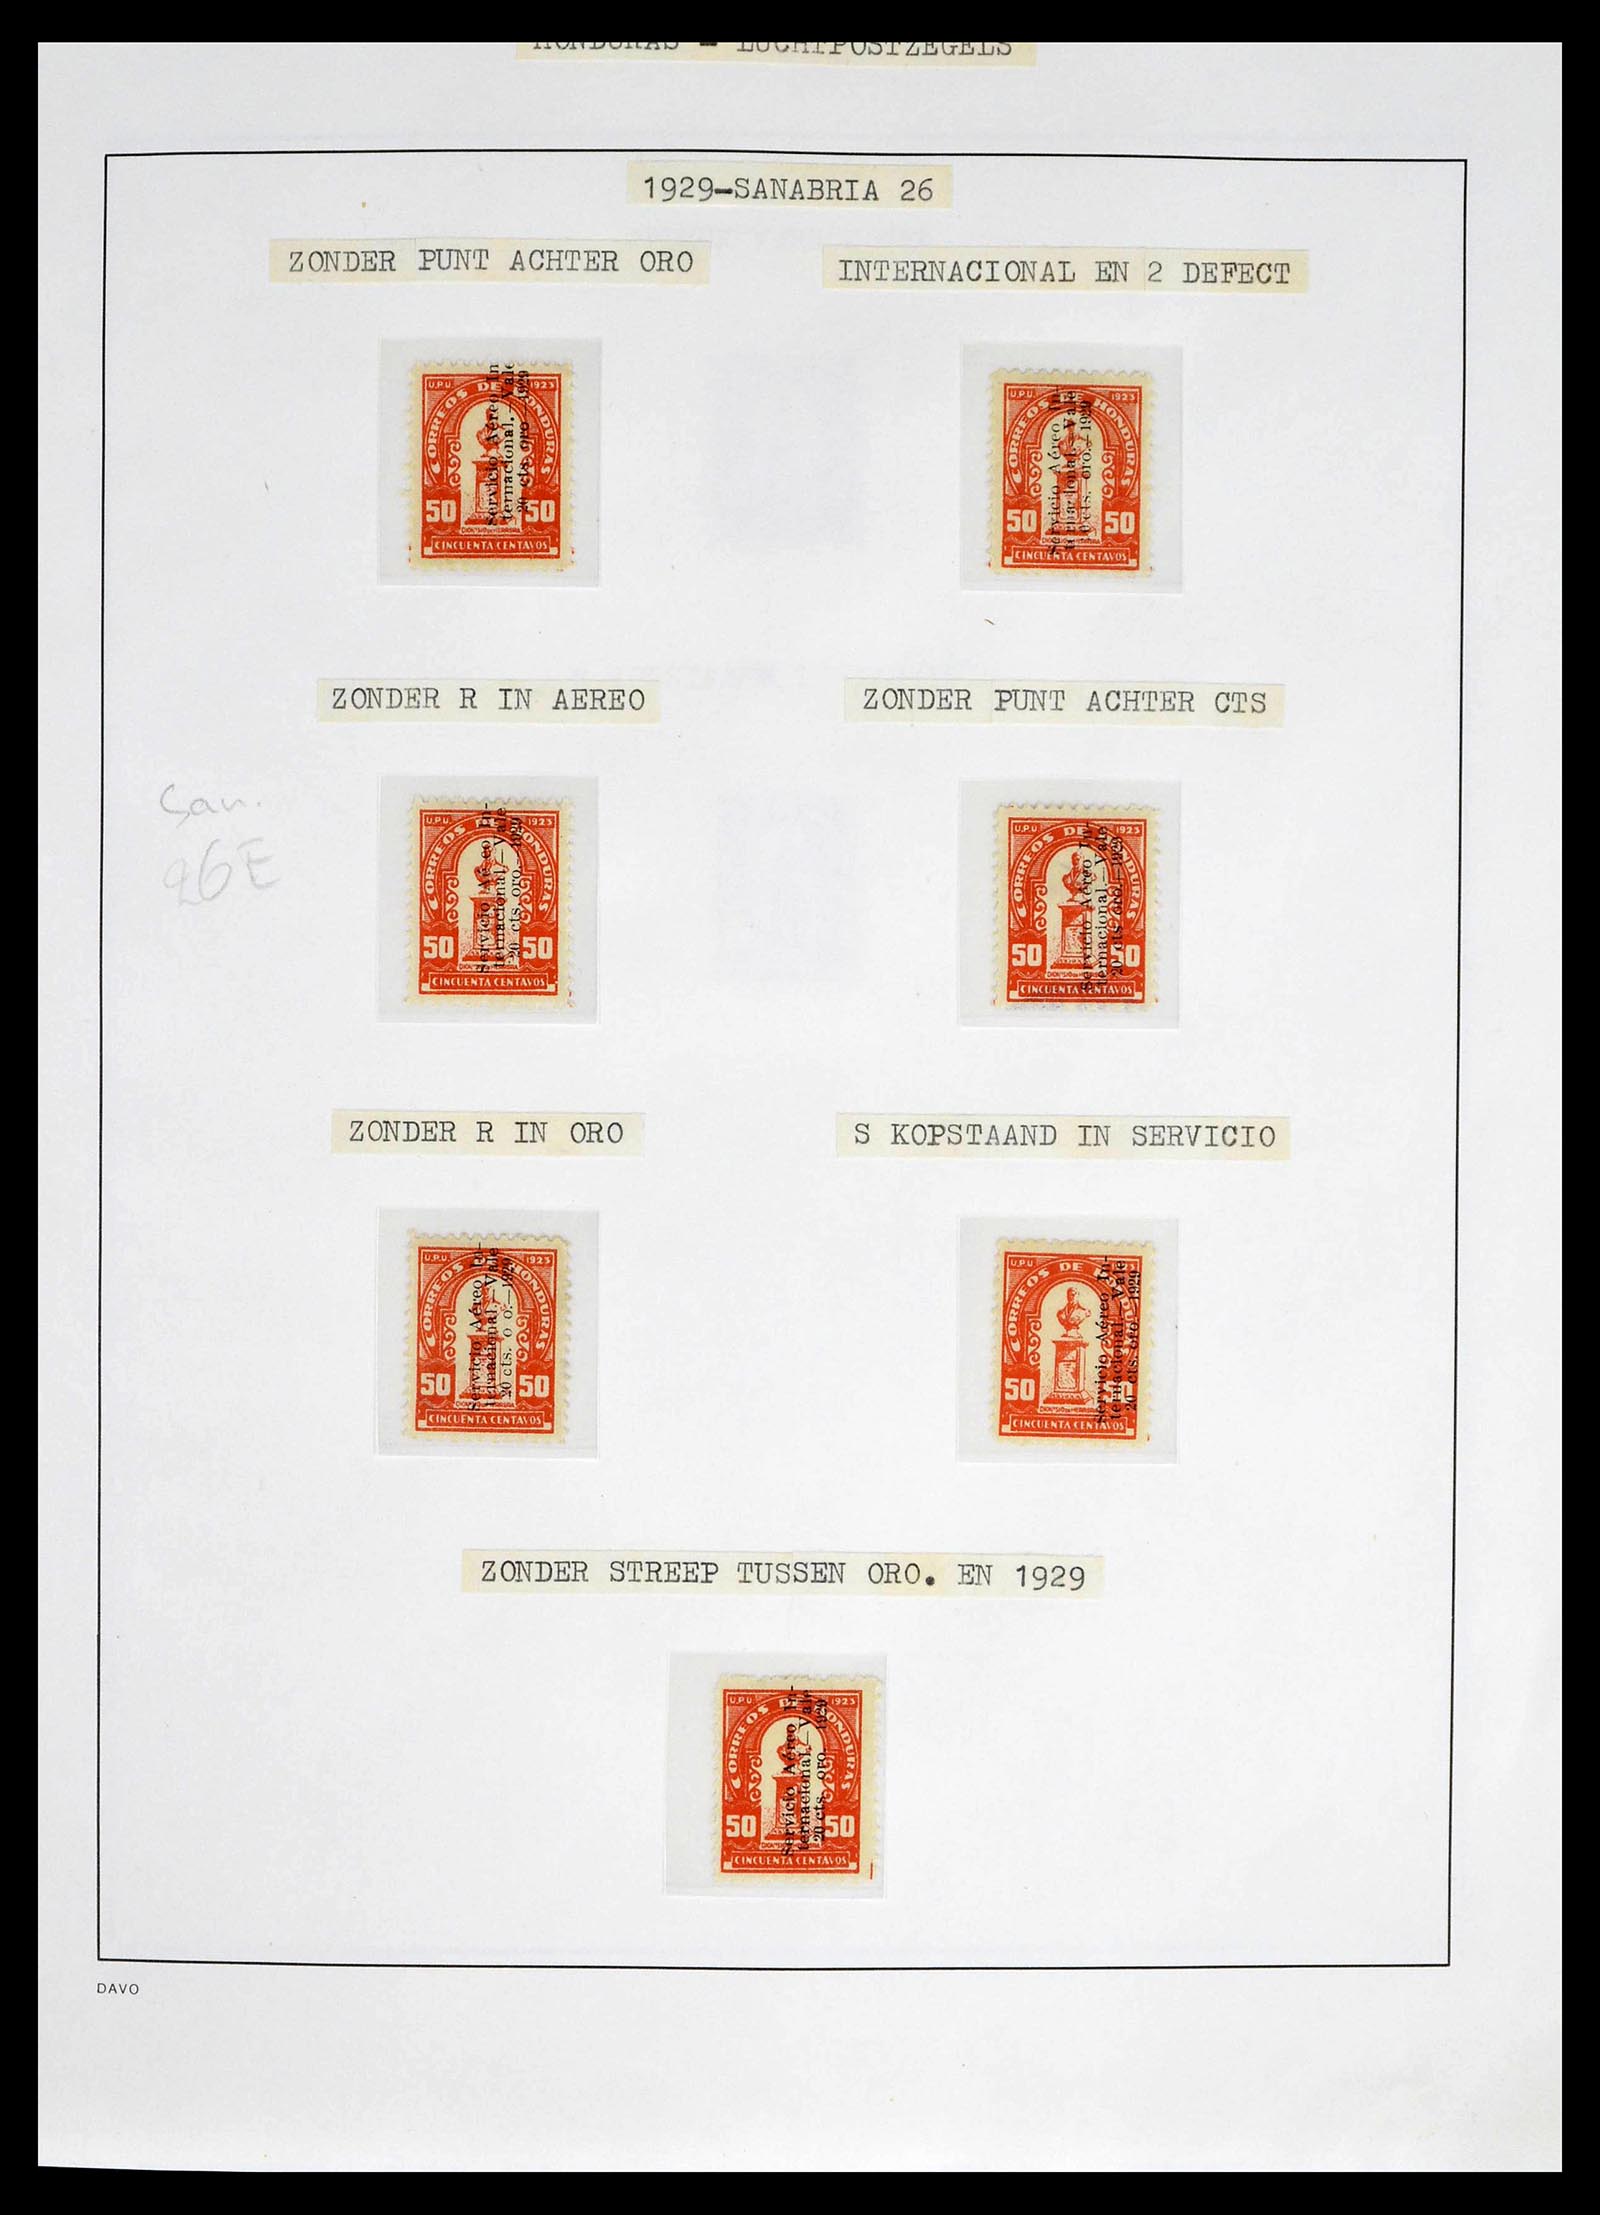 39410 0005 - Stamp collection 39410 Honduras topcollection airmail 1925-1984.